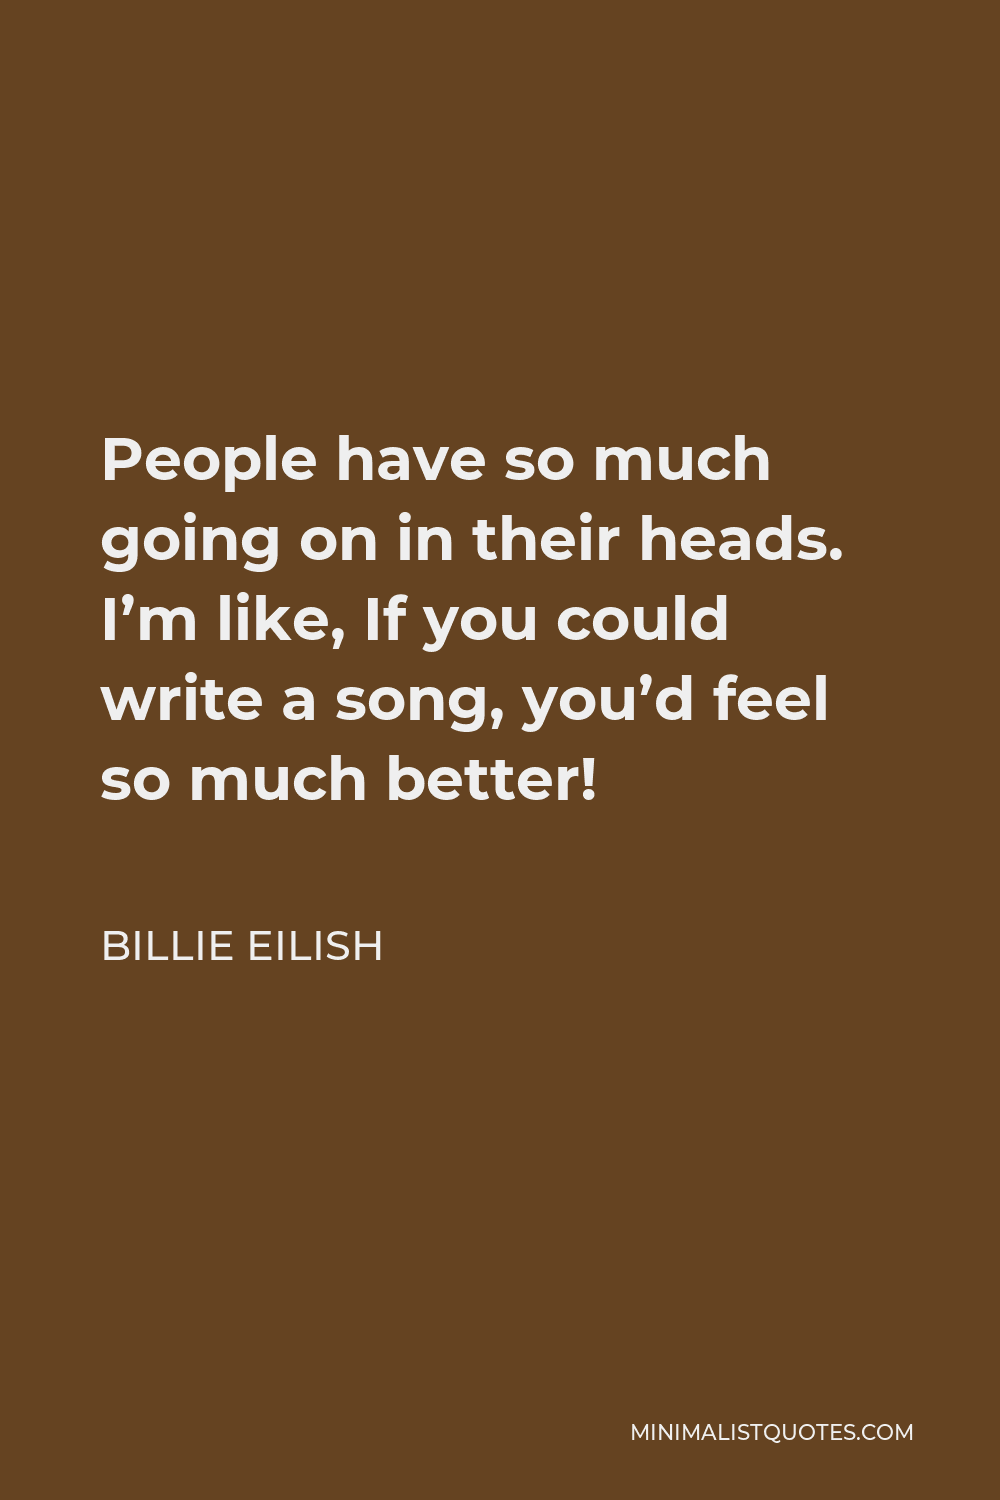 Billie Eilish Quote - People have so much going on in their heads. I’m like, If you could write a song, you’d feel so much better!